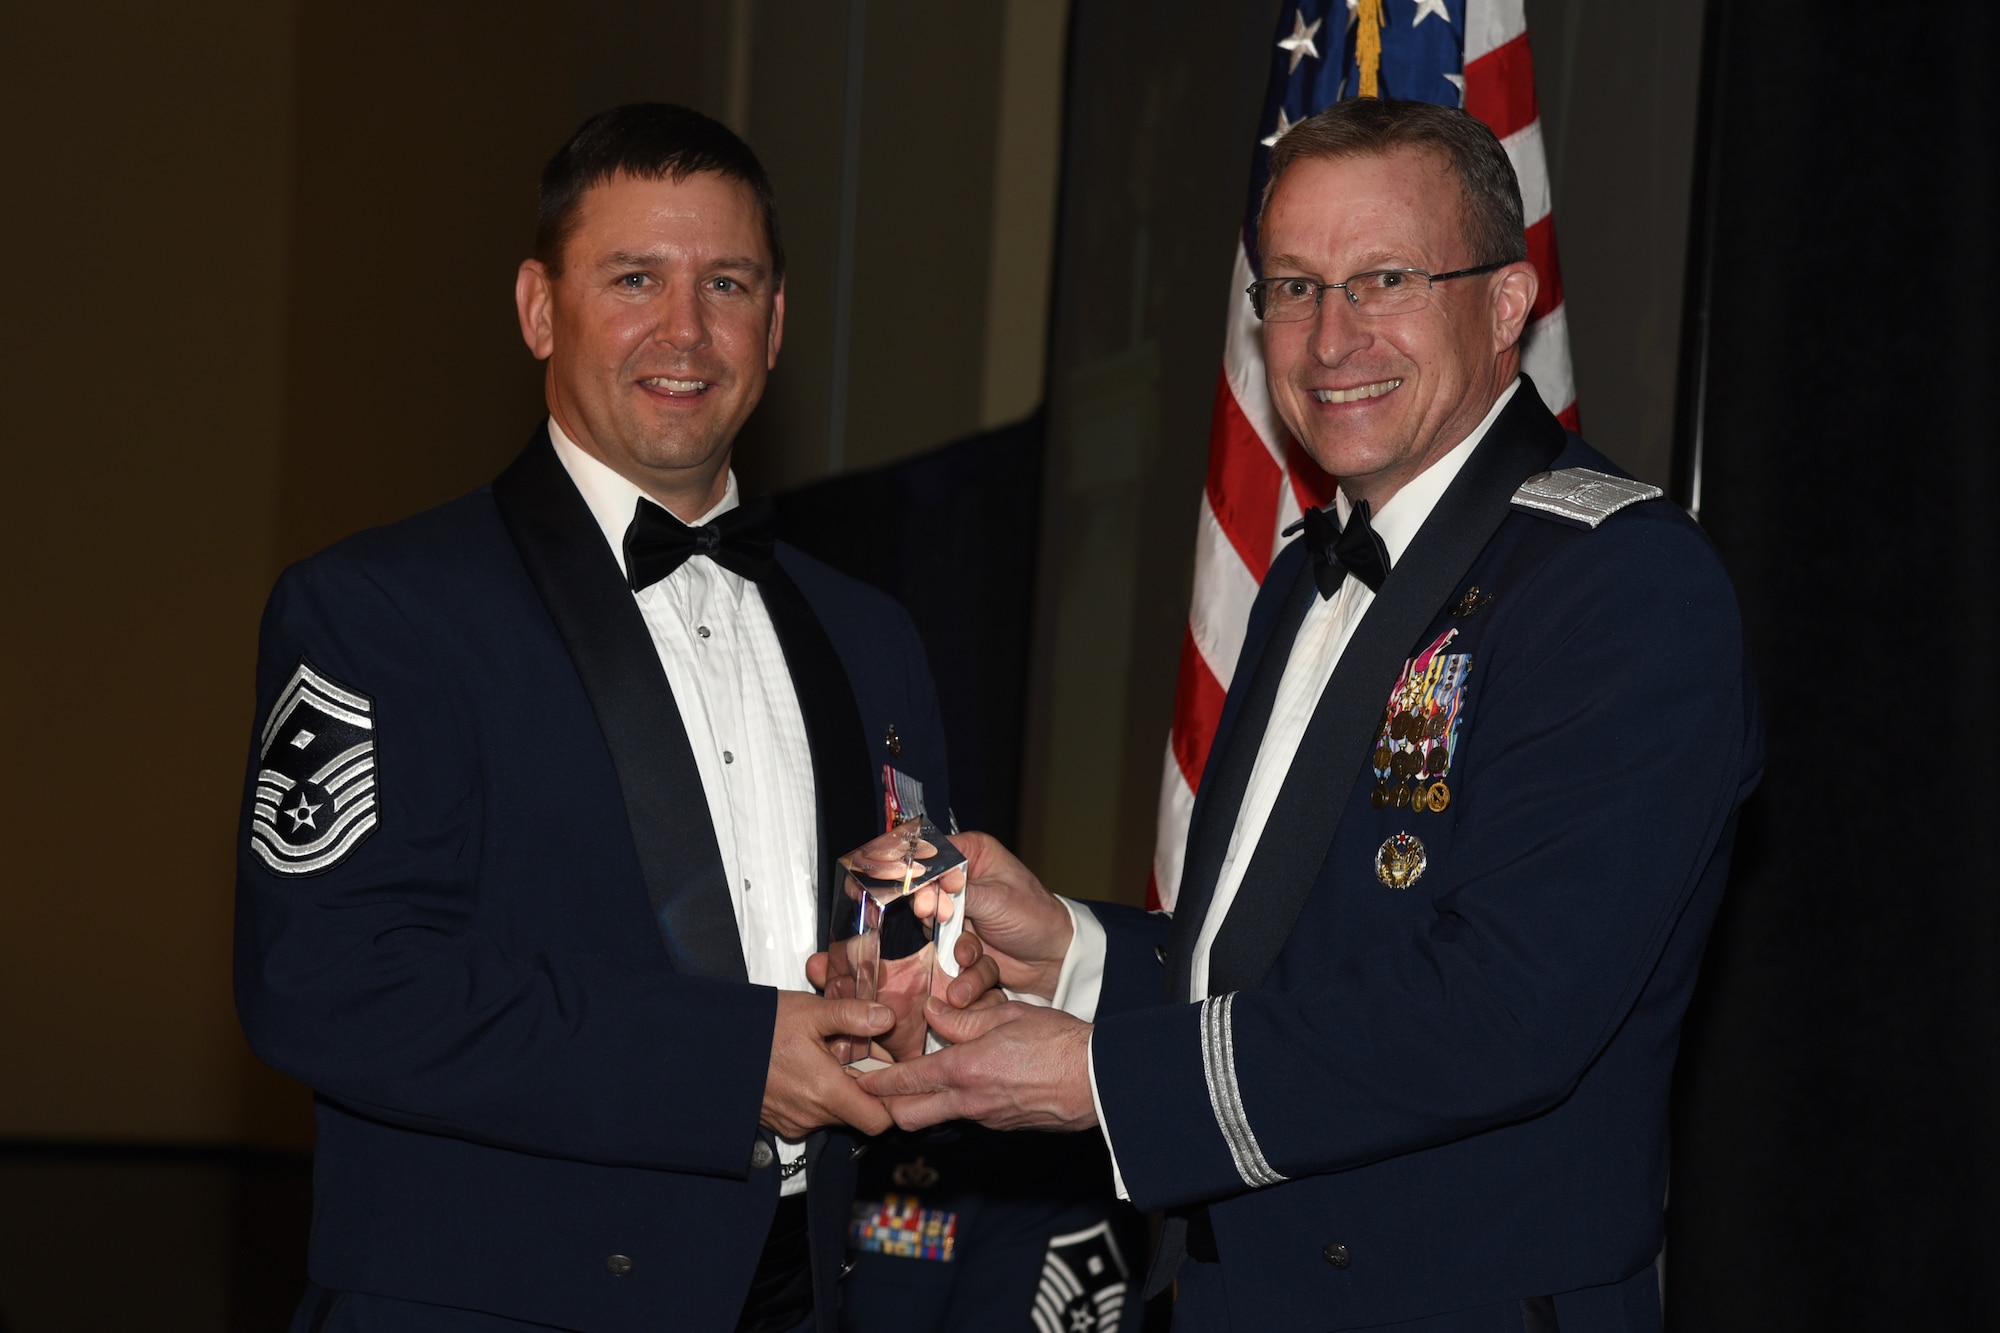 Senior Master Sgt. Chris Walberg, is selected as the North Dakota Air National Guard First Sergeant of the Year